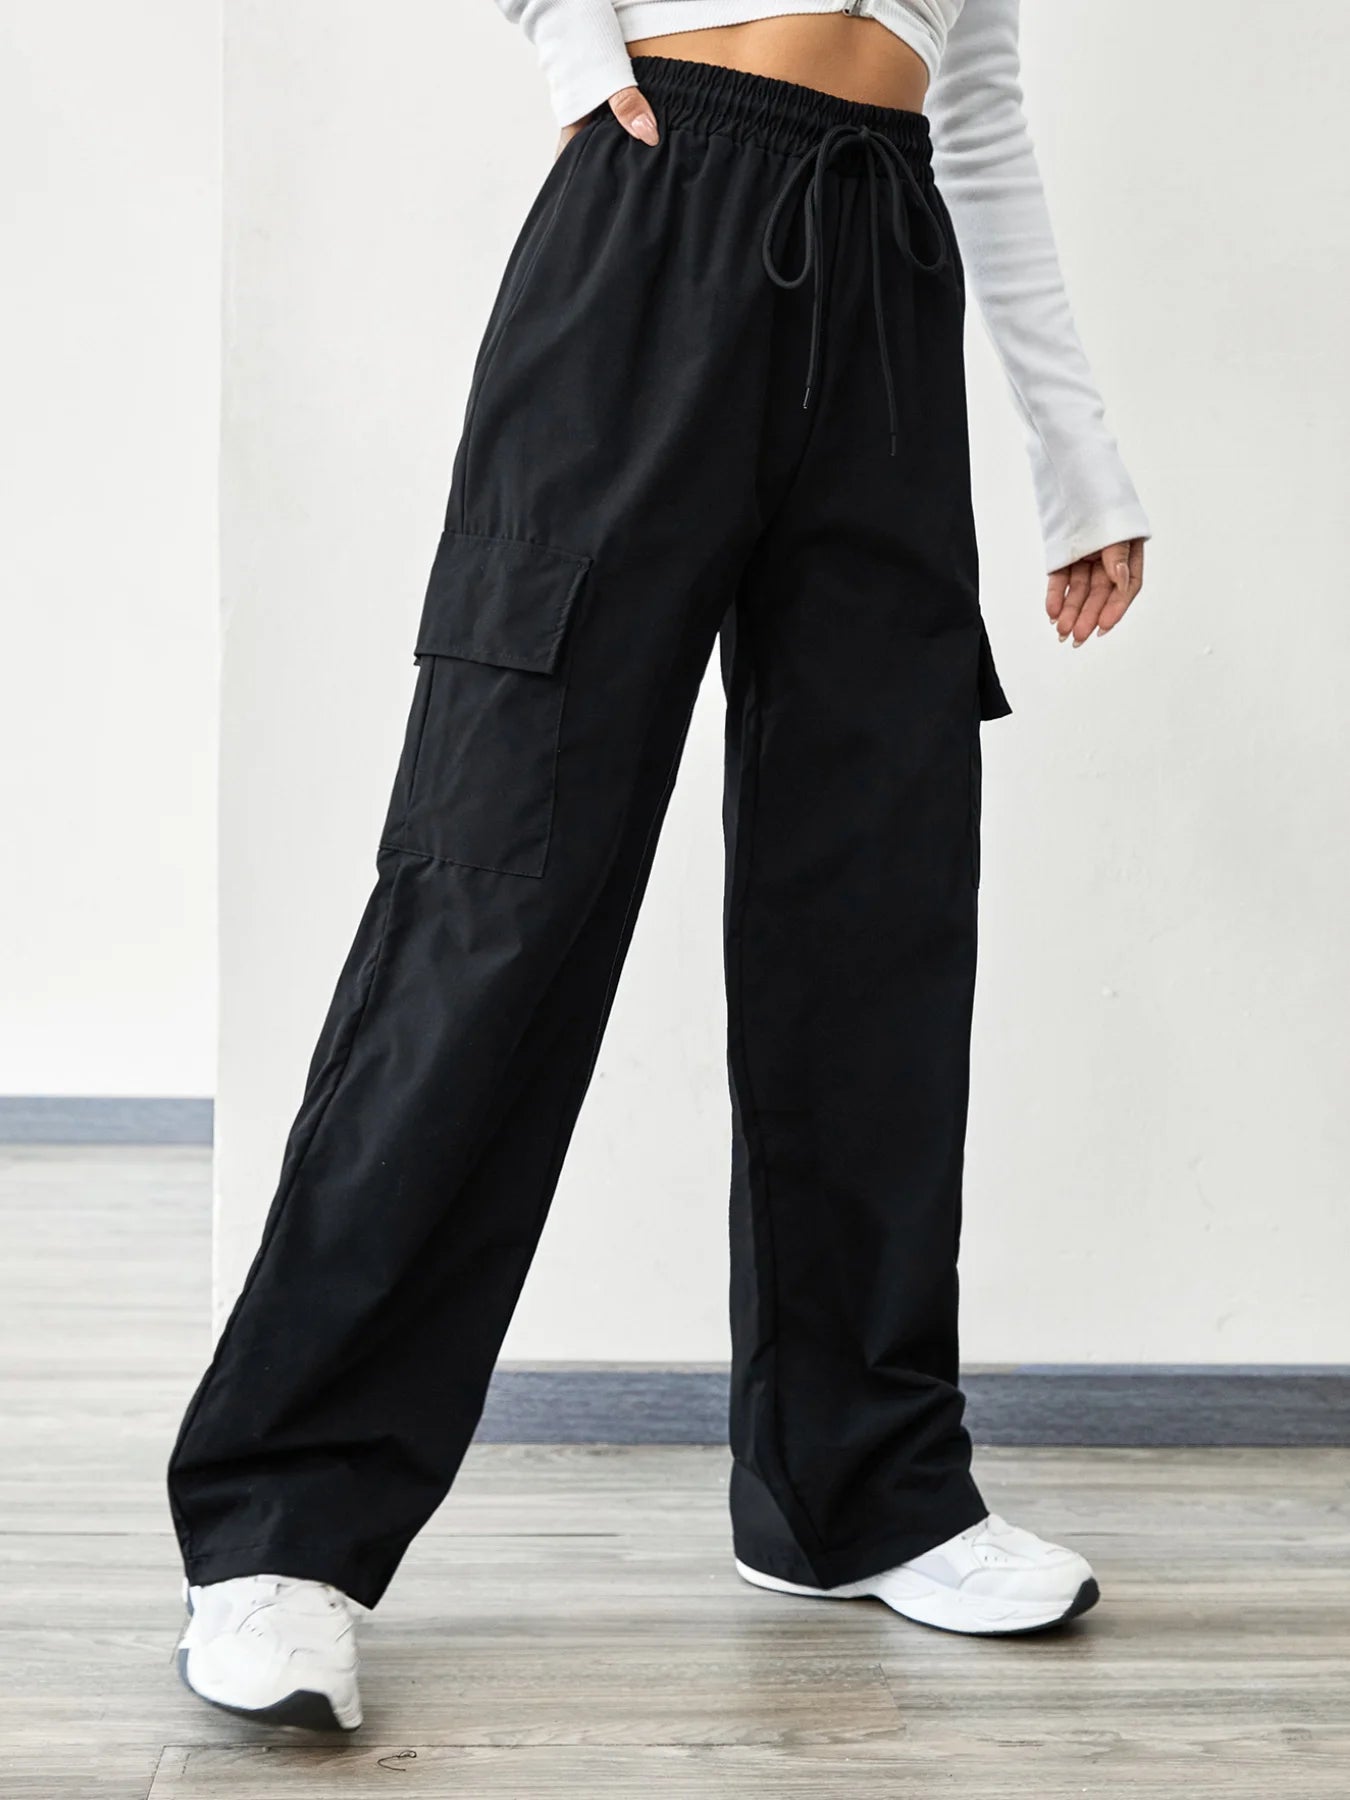 Women's High Waisted Wide-Leg Pants with Multiple Pockets